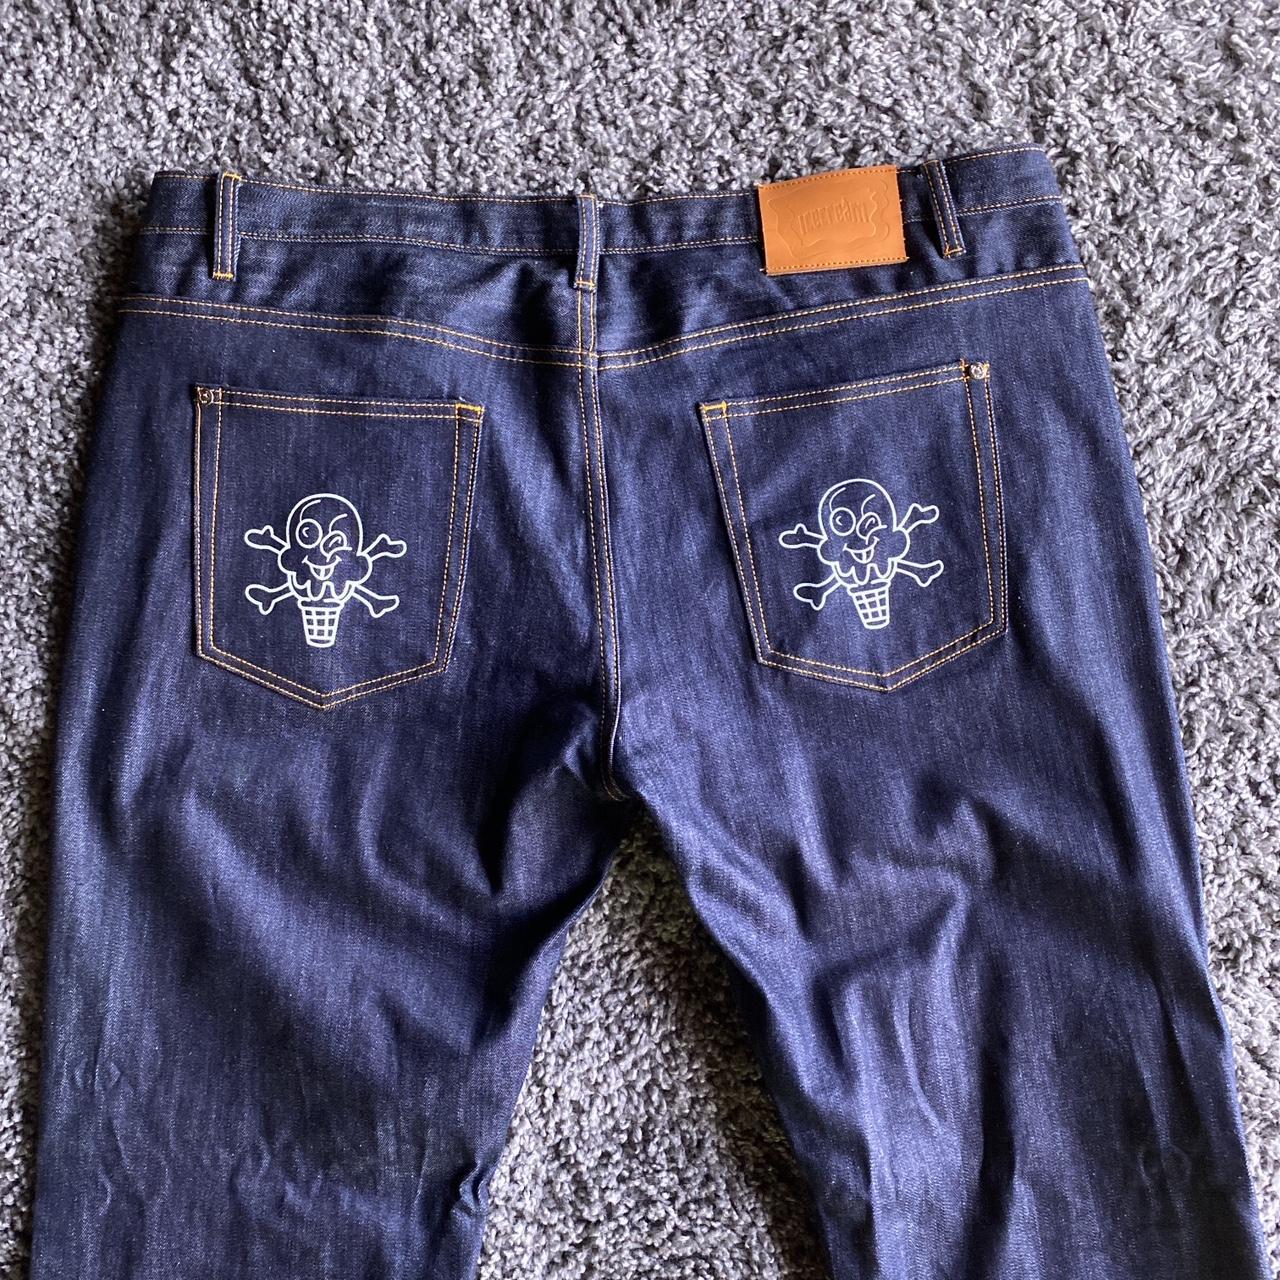 Billionaire boys club jeans used 1x / no stains... - Depop